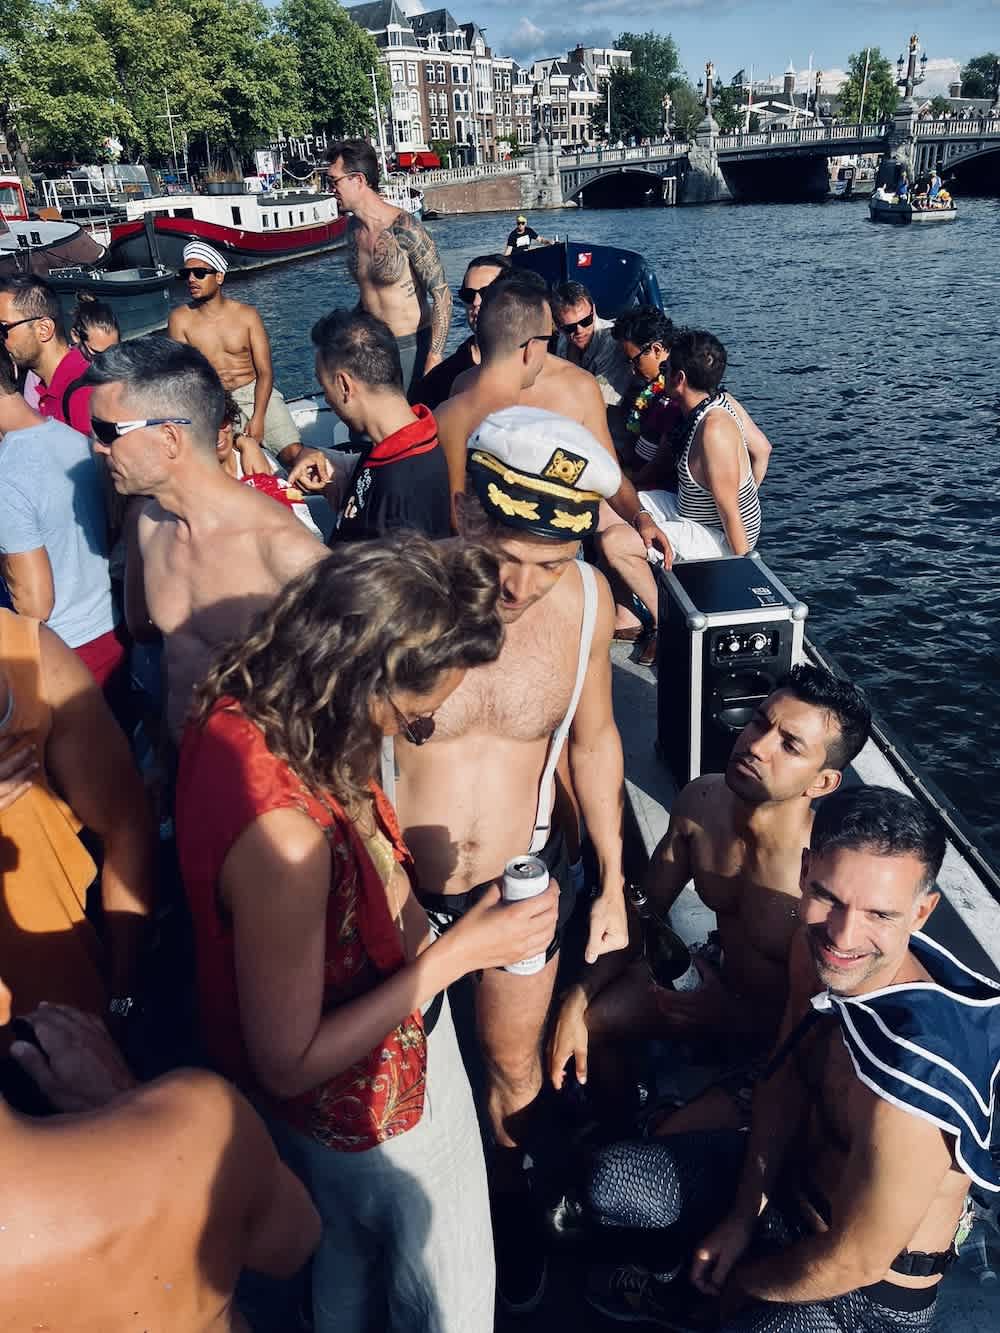 A festive crowd on a boat party, waving and dancing, during a gay pride celebration in Amsterdam, encapsulating the exuberance of the LGBTQ+ community.